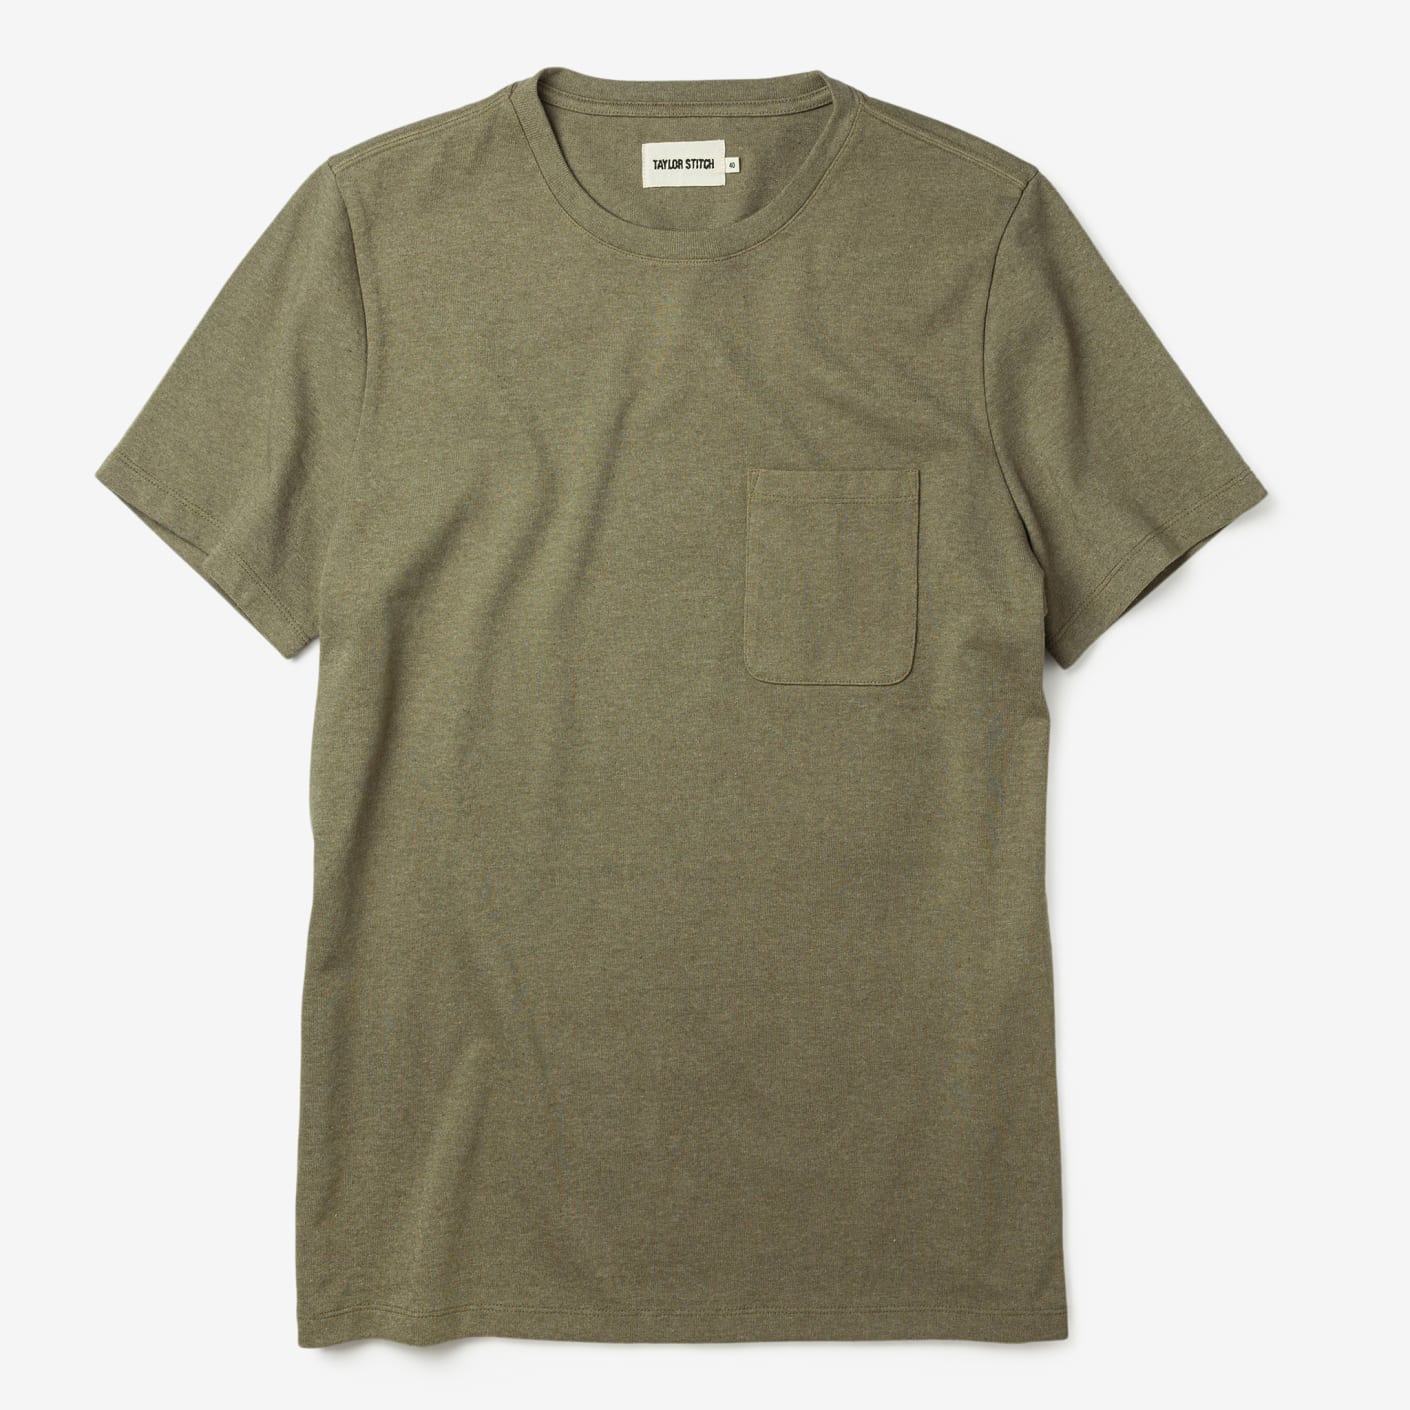 Taylor Stitch The Heavy Bag Tee – Olive | Bespoke Post